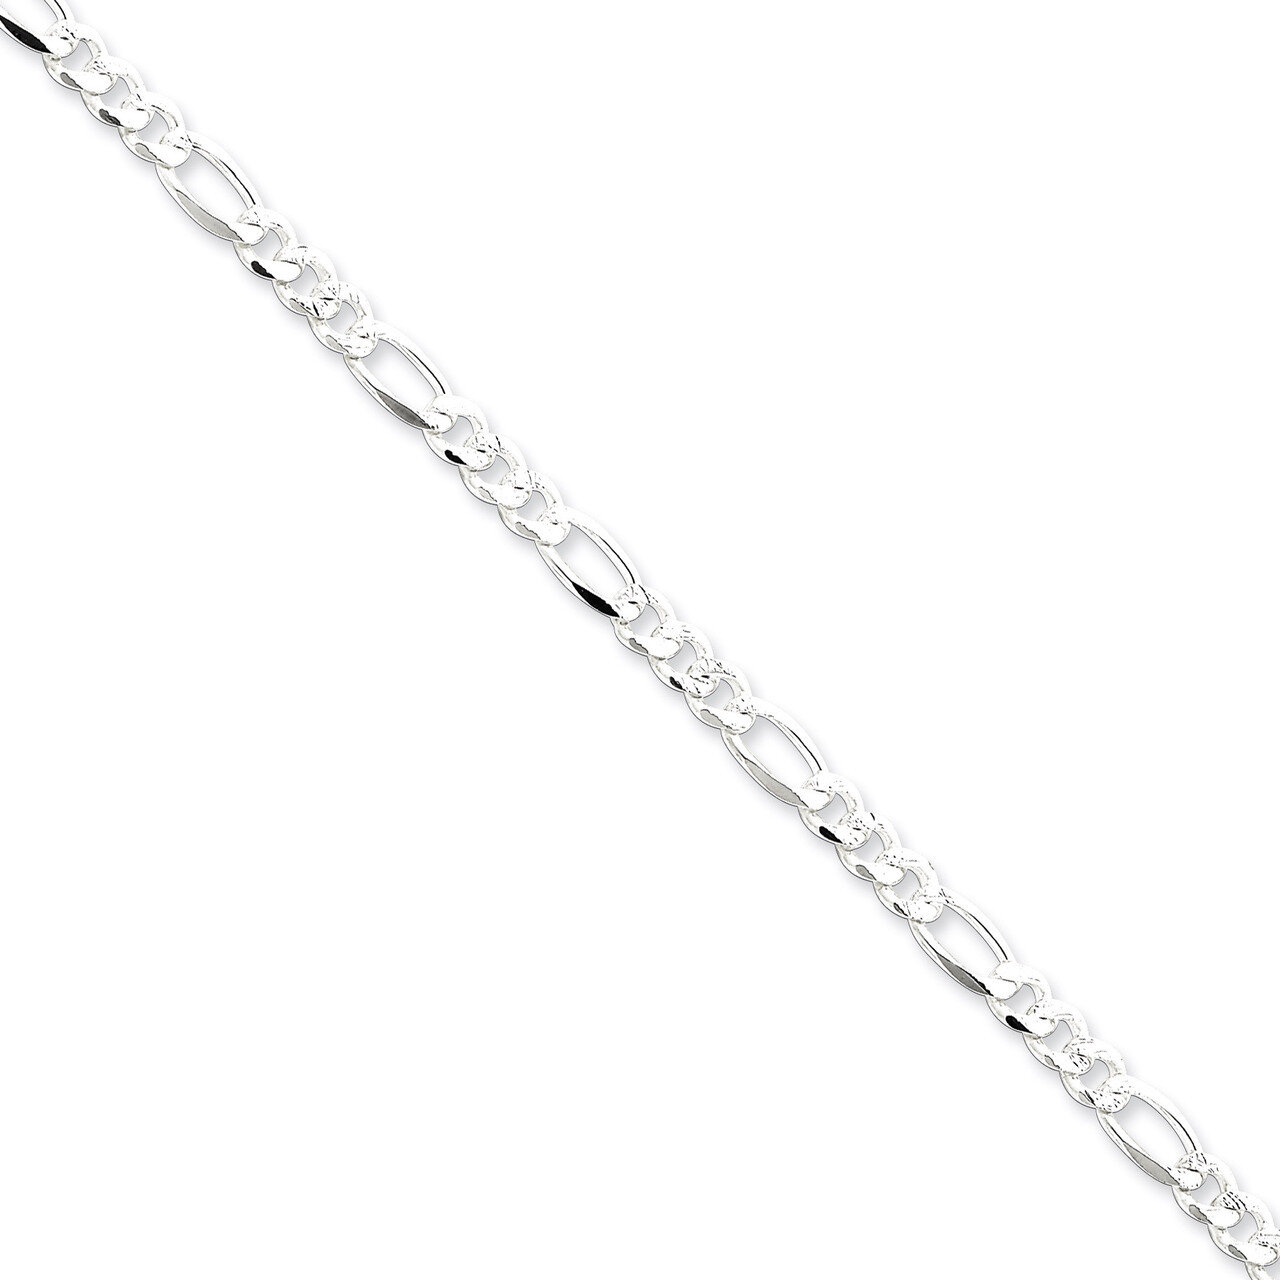 7 Inch 4.75mm Pave Flat Figaro Chain Sterling Silver QFF120-7